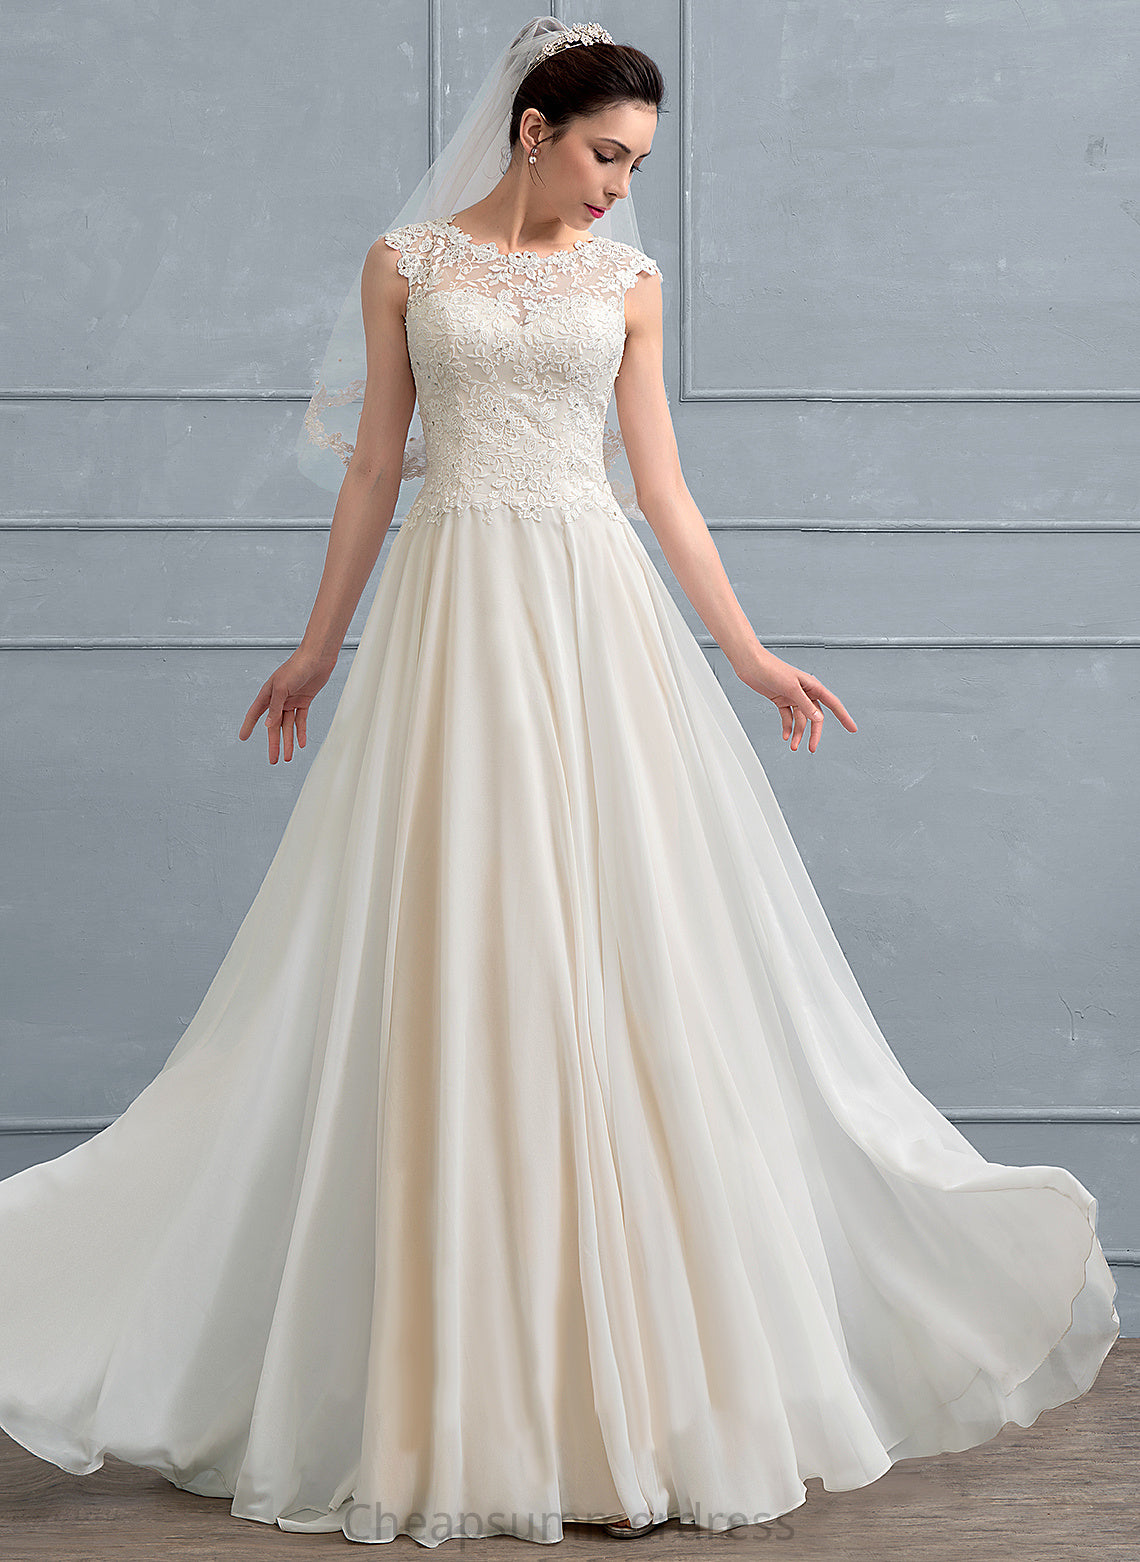 A-Line Sequins Bria Beading Dress Chiffon Lace Floor-Length With Scoop Wedding Dresses Wedding